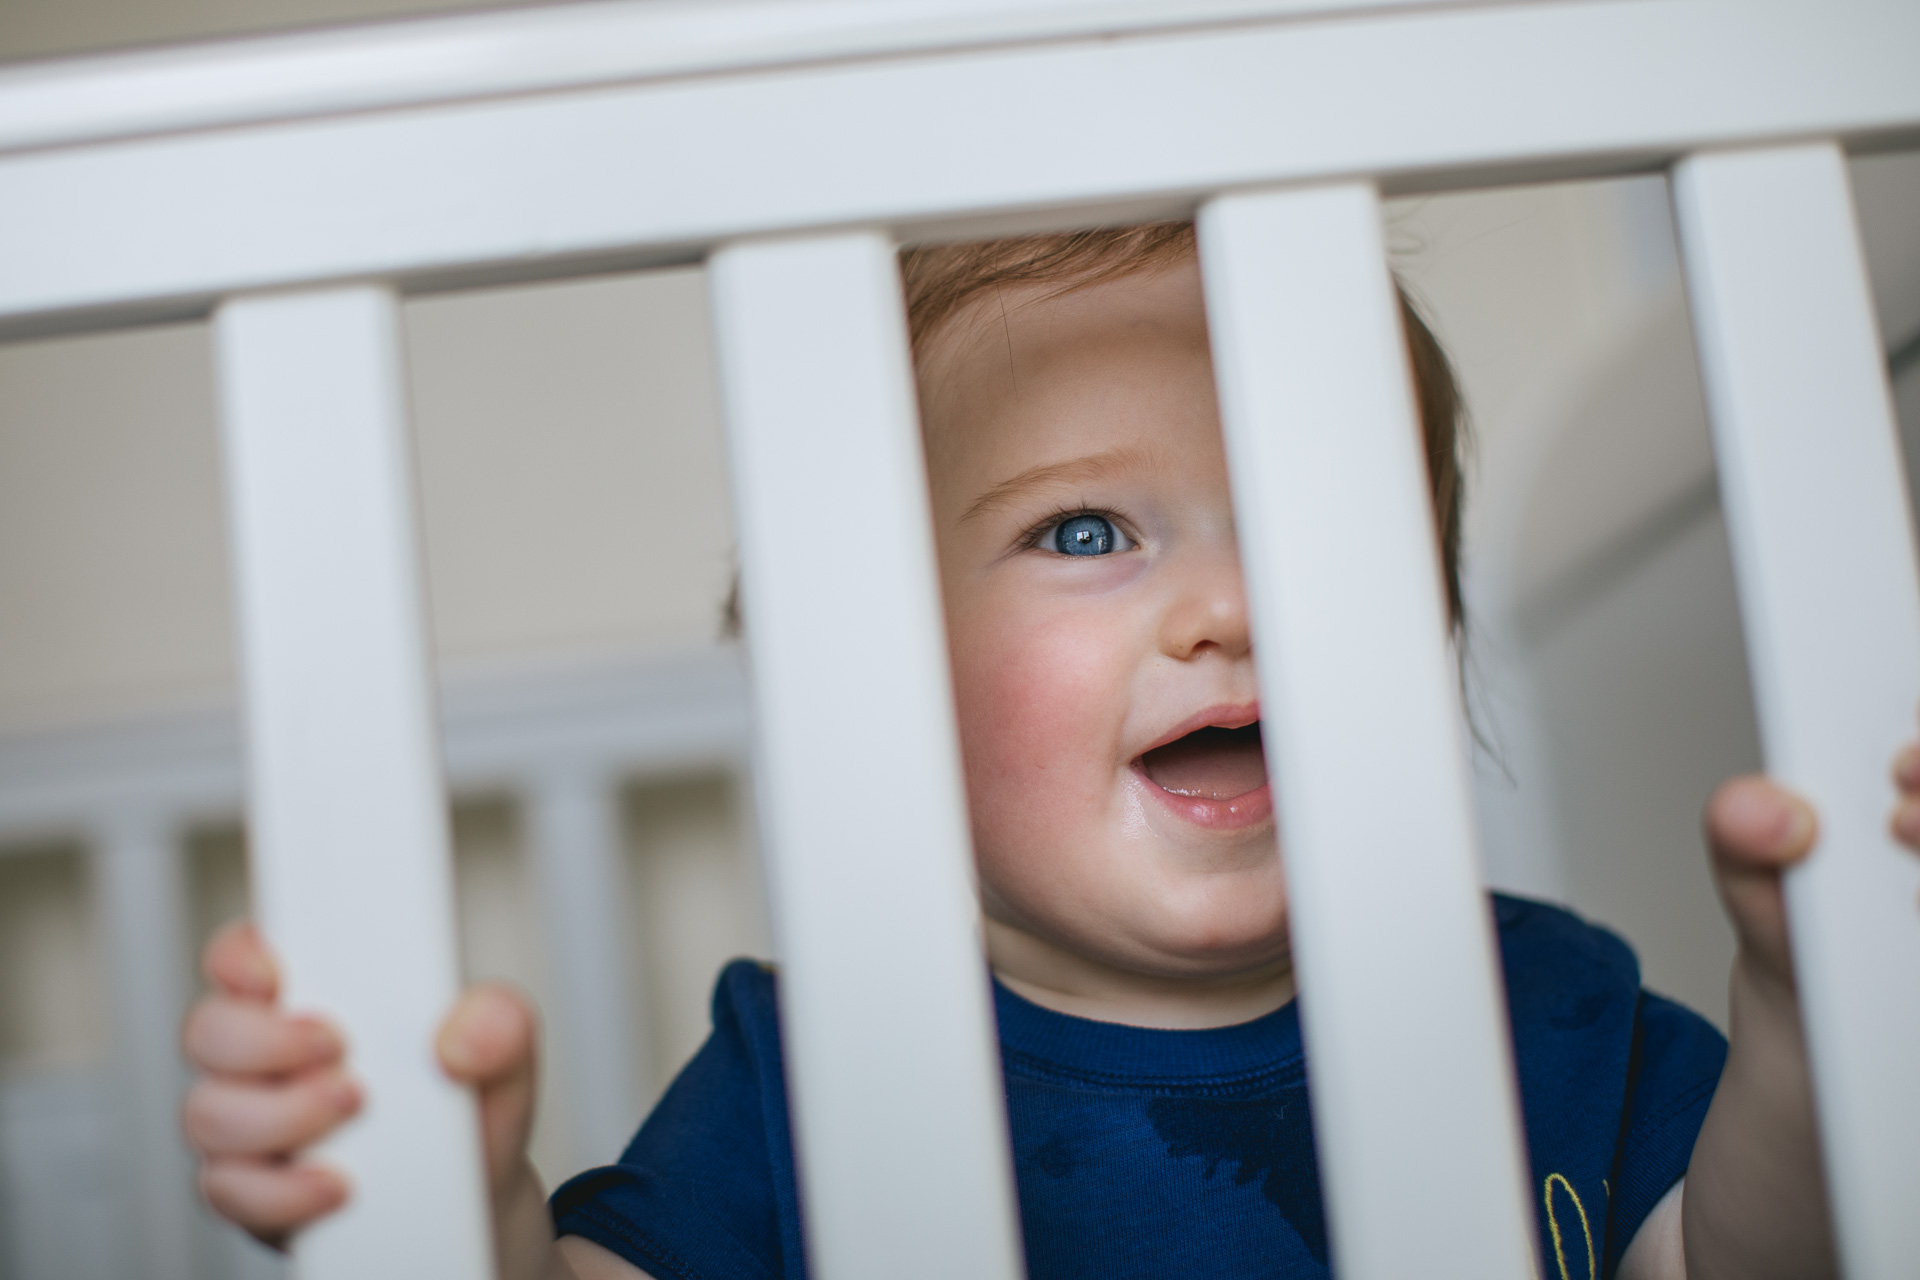 A toddler peeping through the bars of a cot